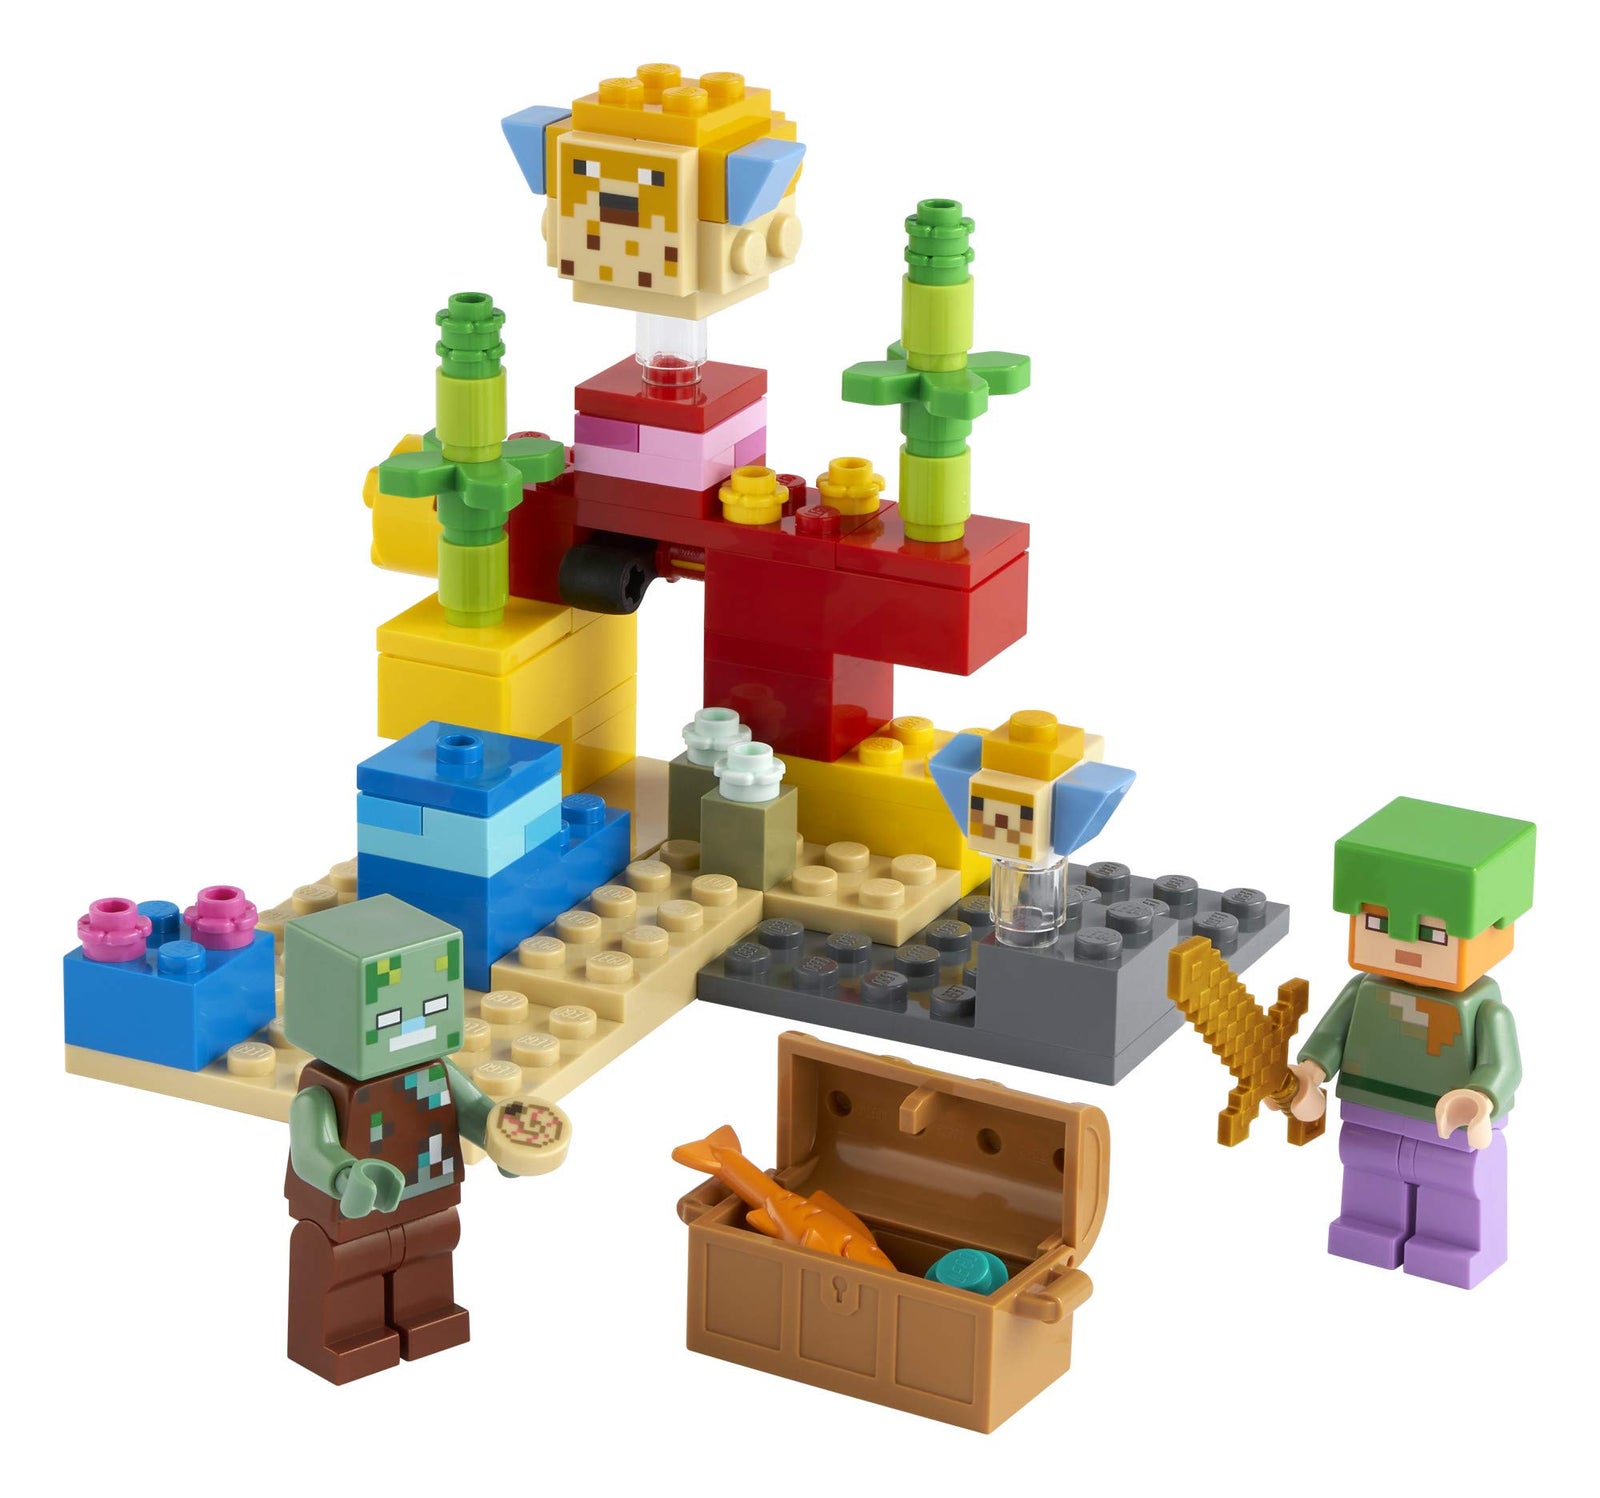 LEGO Minecraft The Coral Reef 21164 Hands-on Minecraft Marine Toy Featuring Alex, a Drowned and 2 Cool Puffer Fish, New 2021 (92 Pieces)